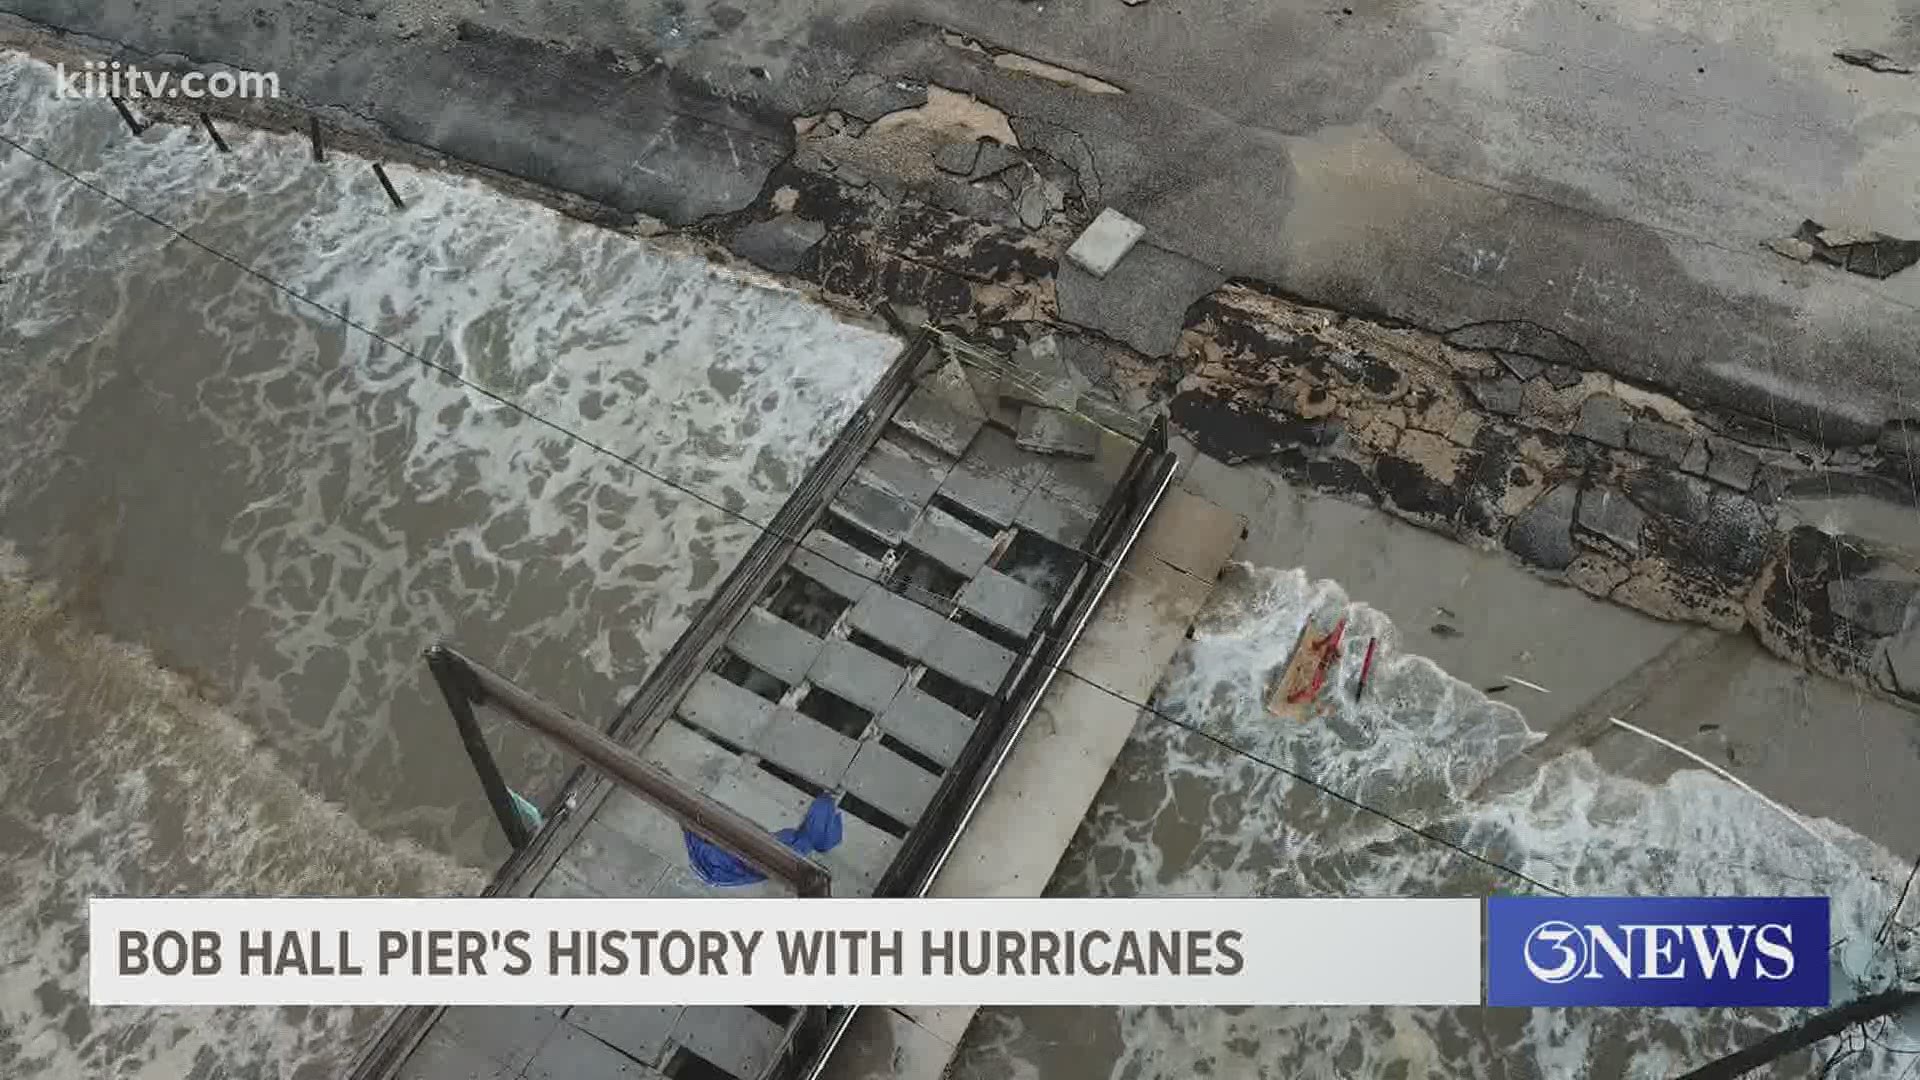 On Sunday, Corpus Christi and Nueces County officials talked with 3 New about what's next for Bob Hall Pier and how many hurricanes it has survived.